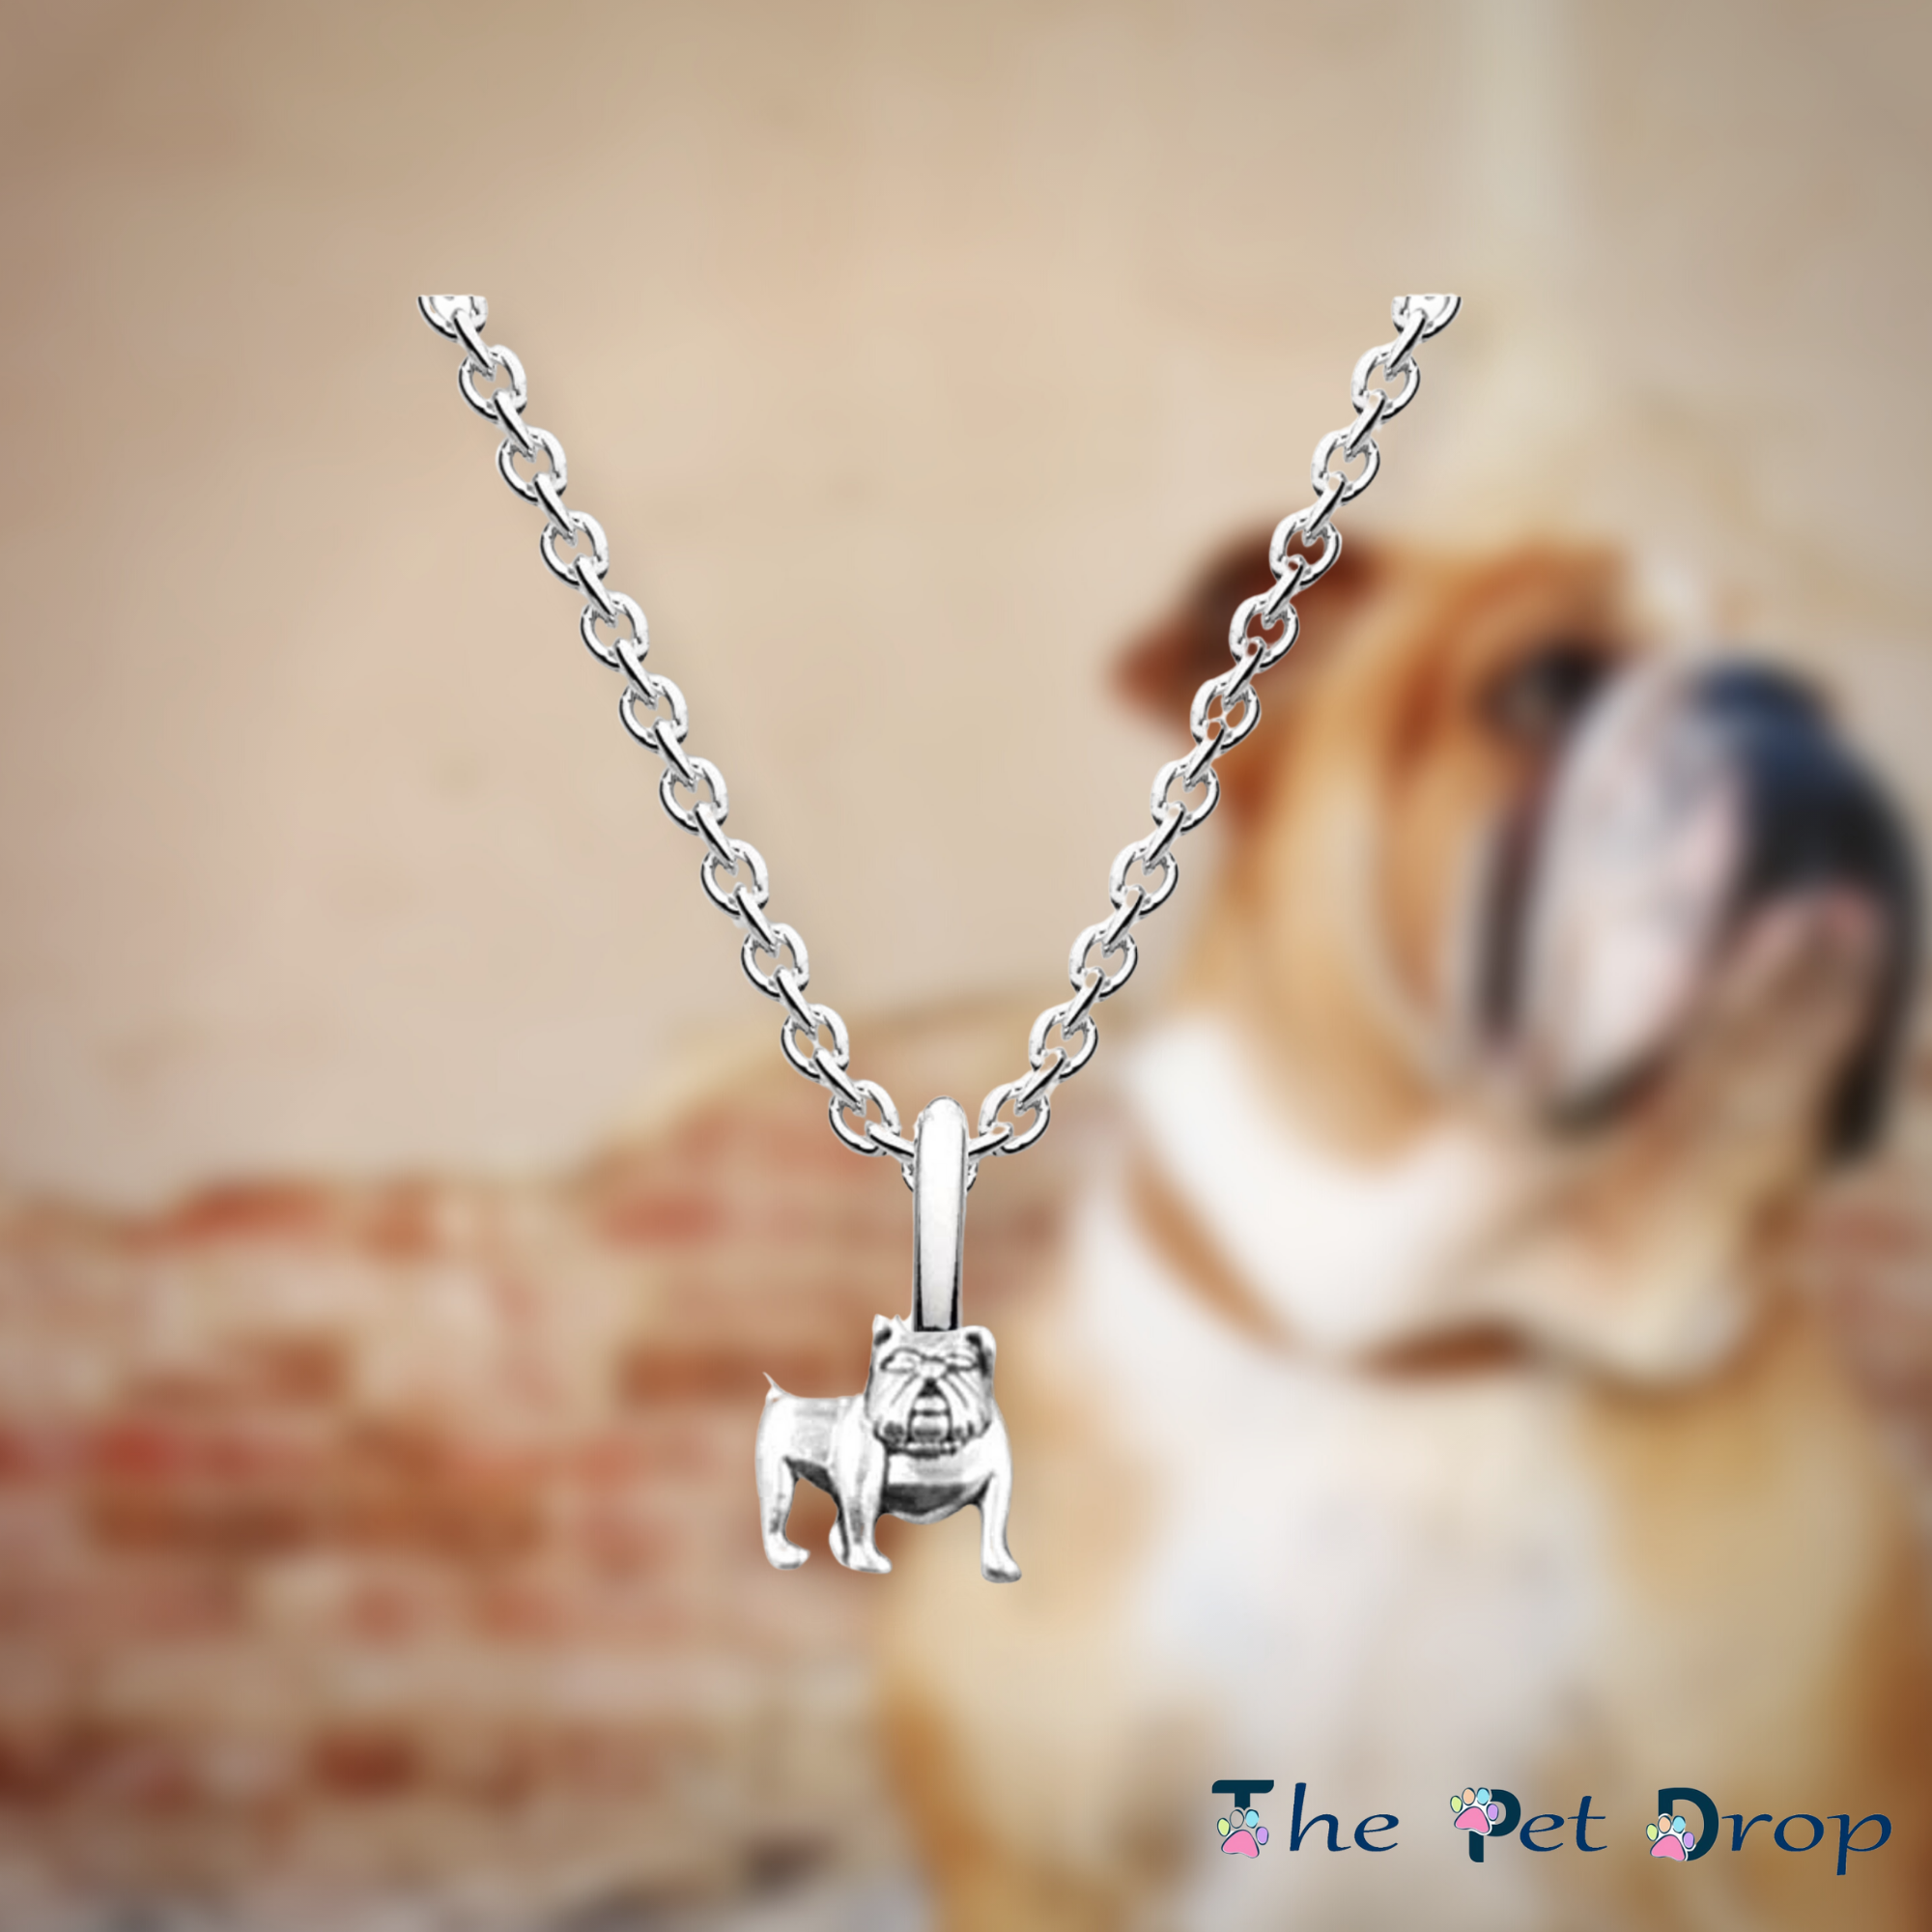 silver little bulldog necklace pendant hanging on a silver chain.